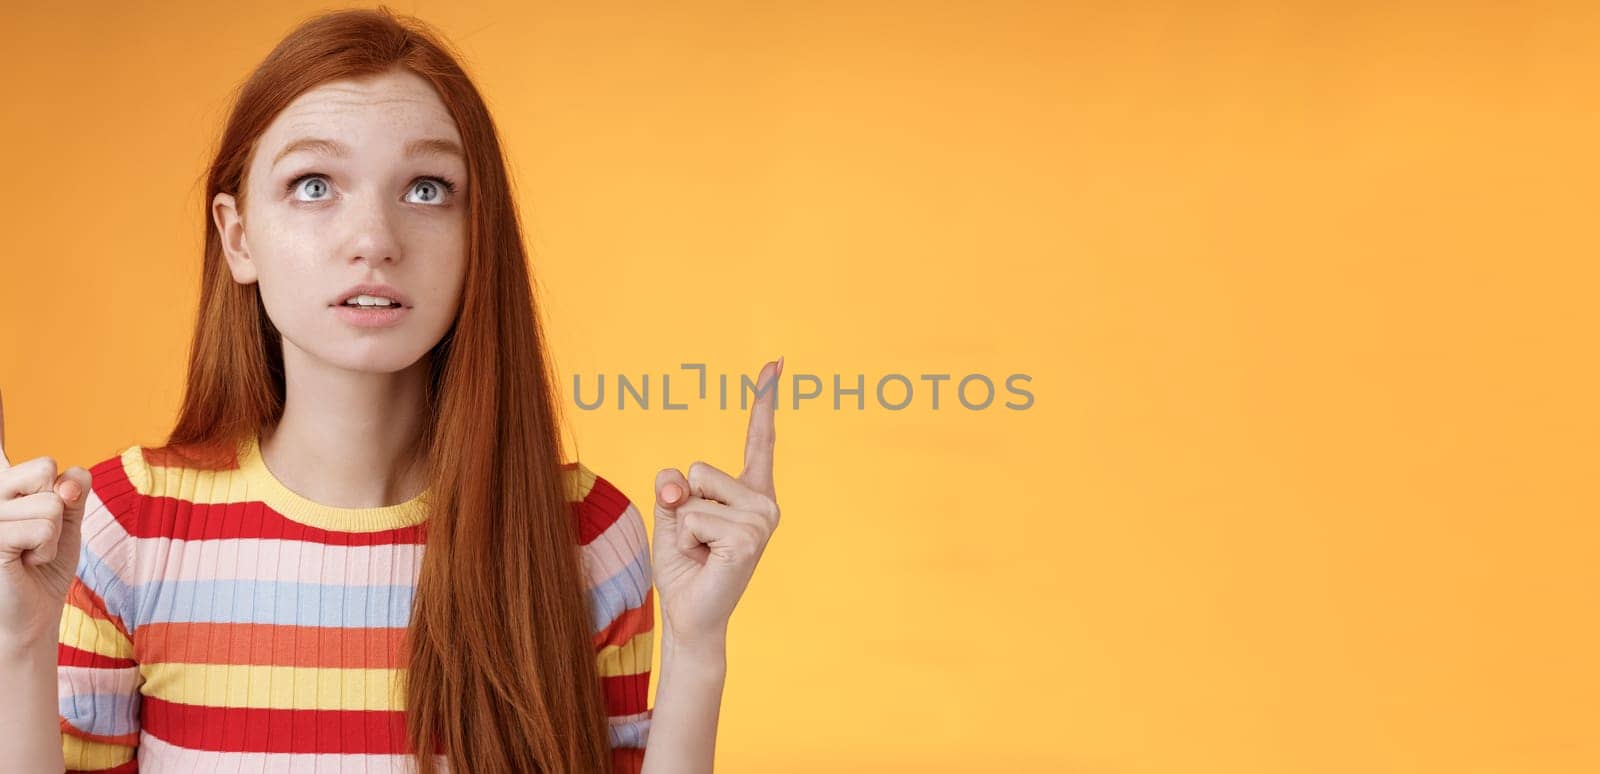 Stunned thrilled young redhead woman peer focused pointing up index fingers upwards look concentrated excited hold breath amused performance standing orange background intrigued and curious.